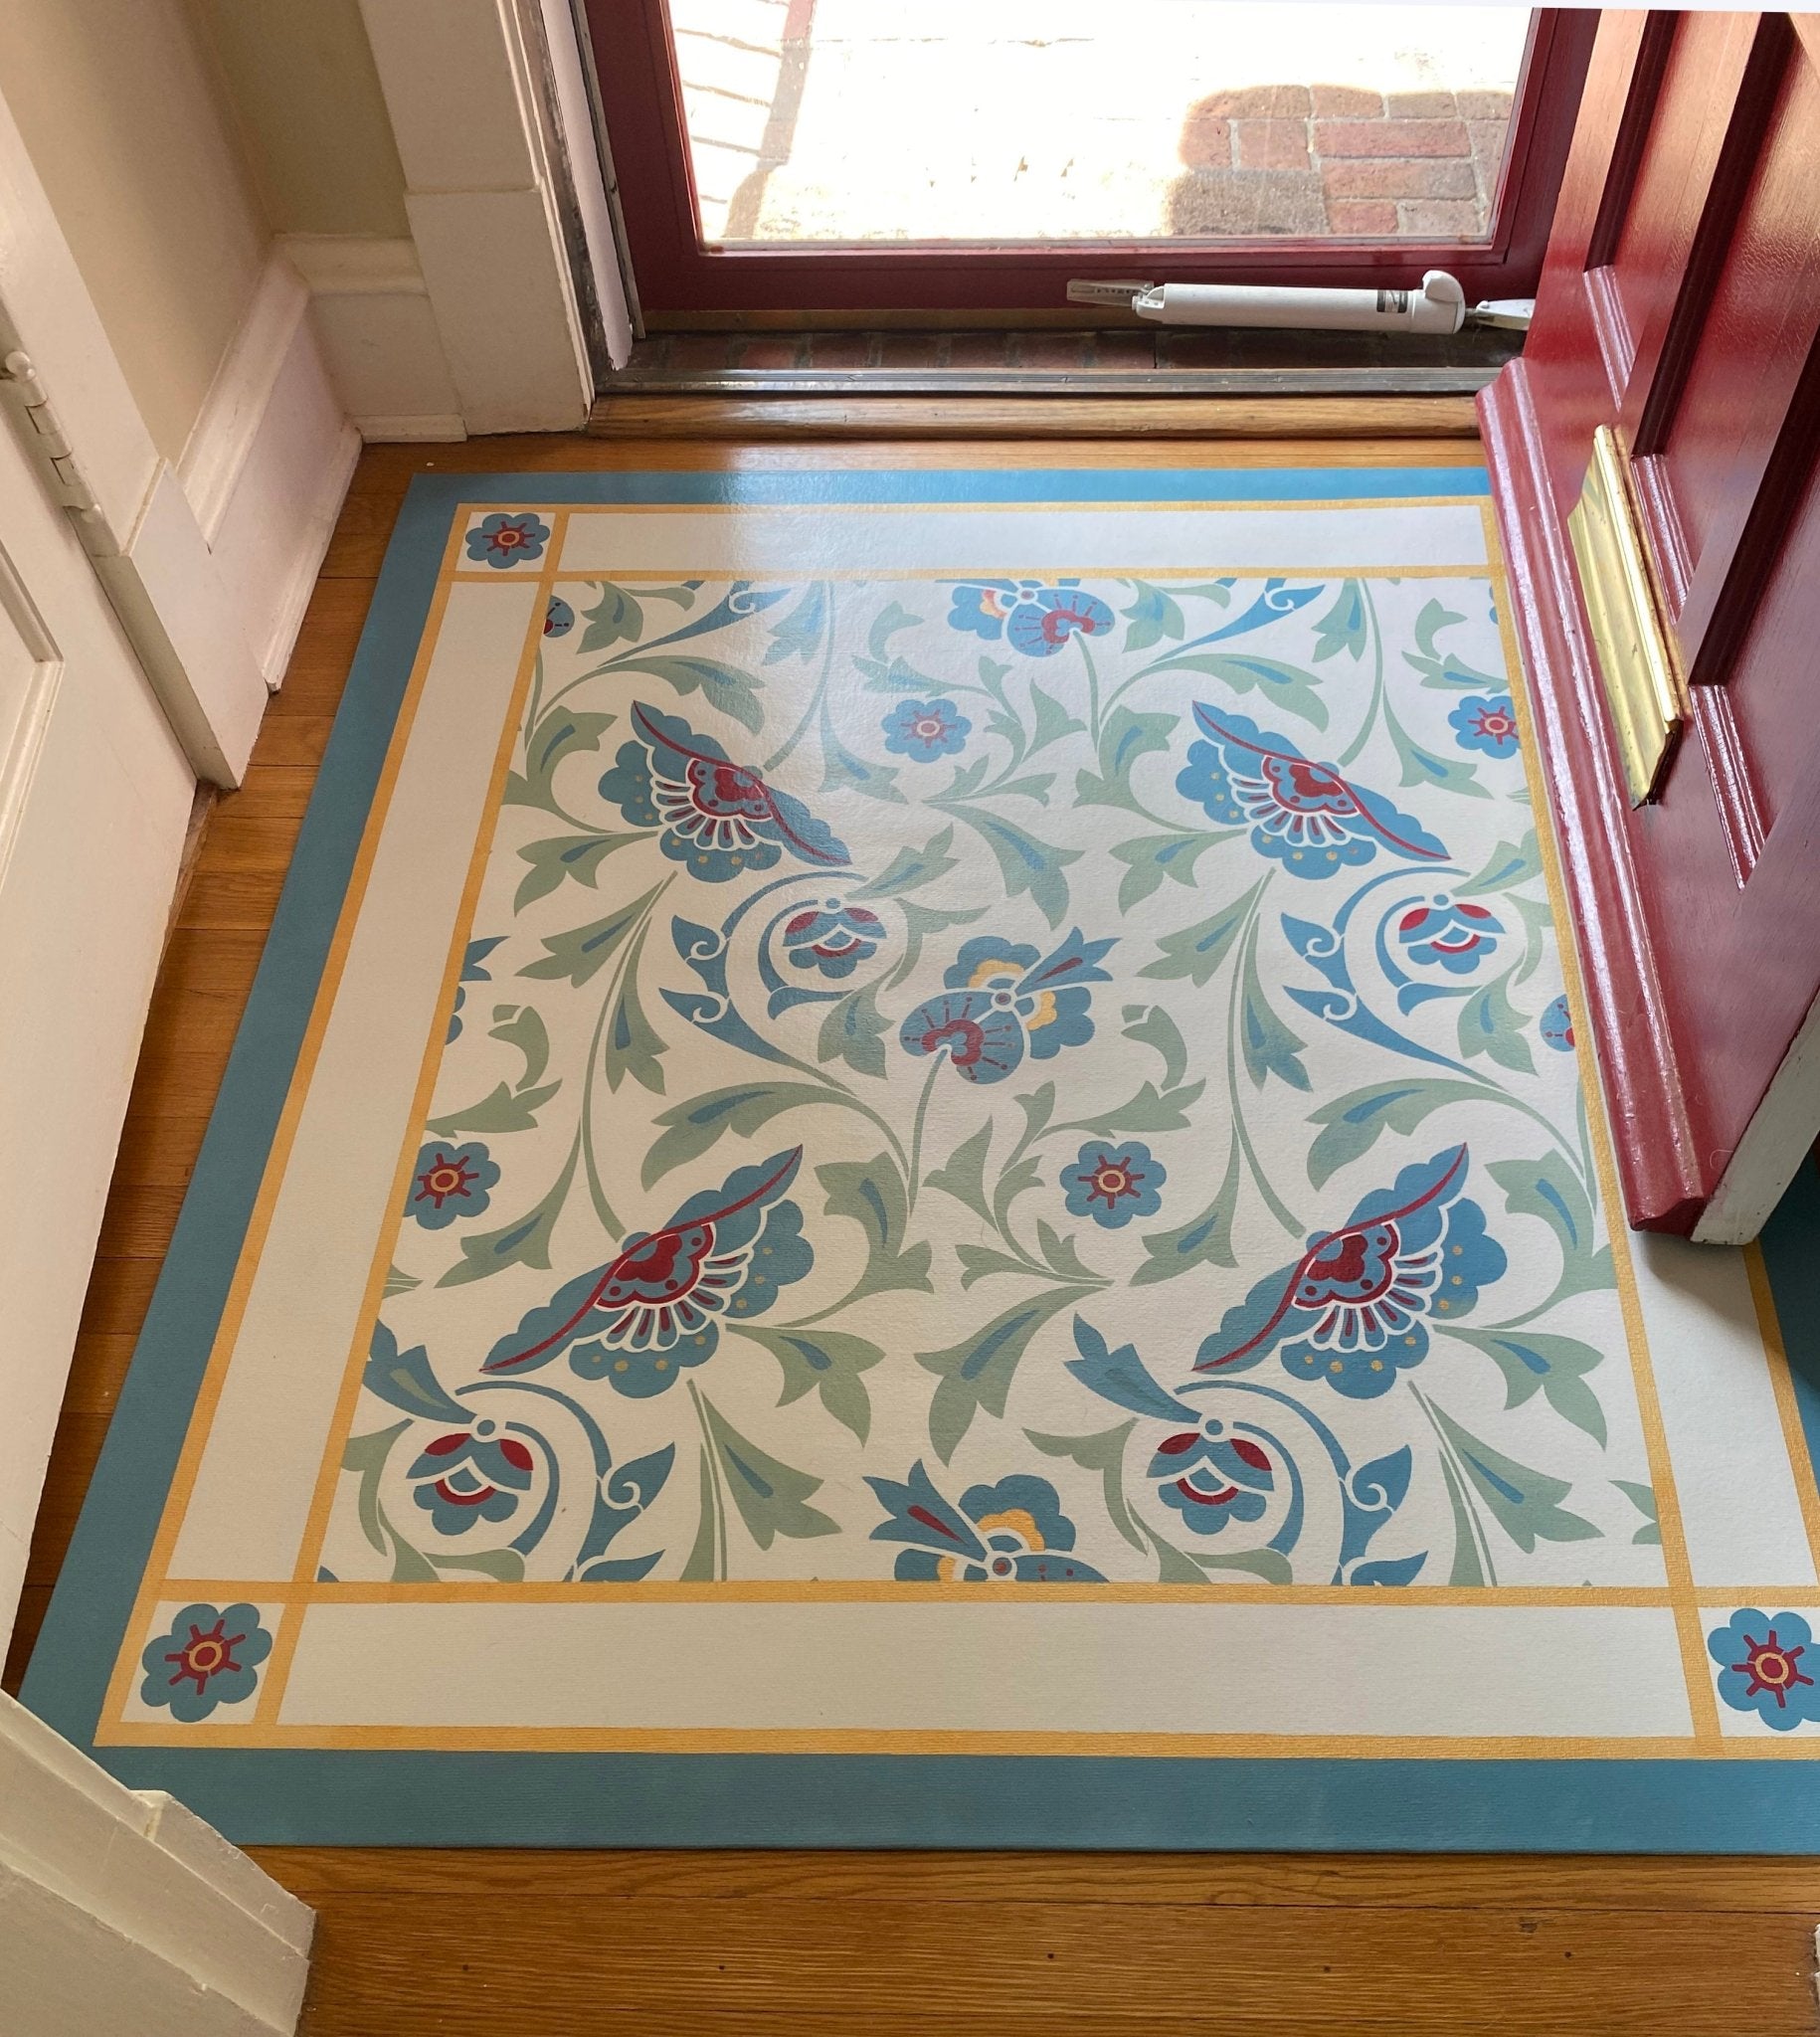 An in-situ image of All-Over-Floral Floorcloth #6 in its entryway.